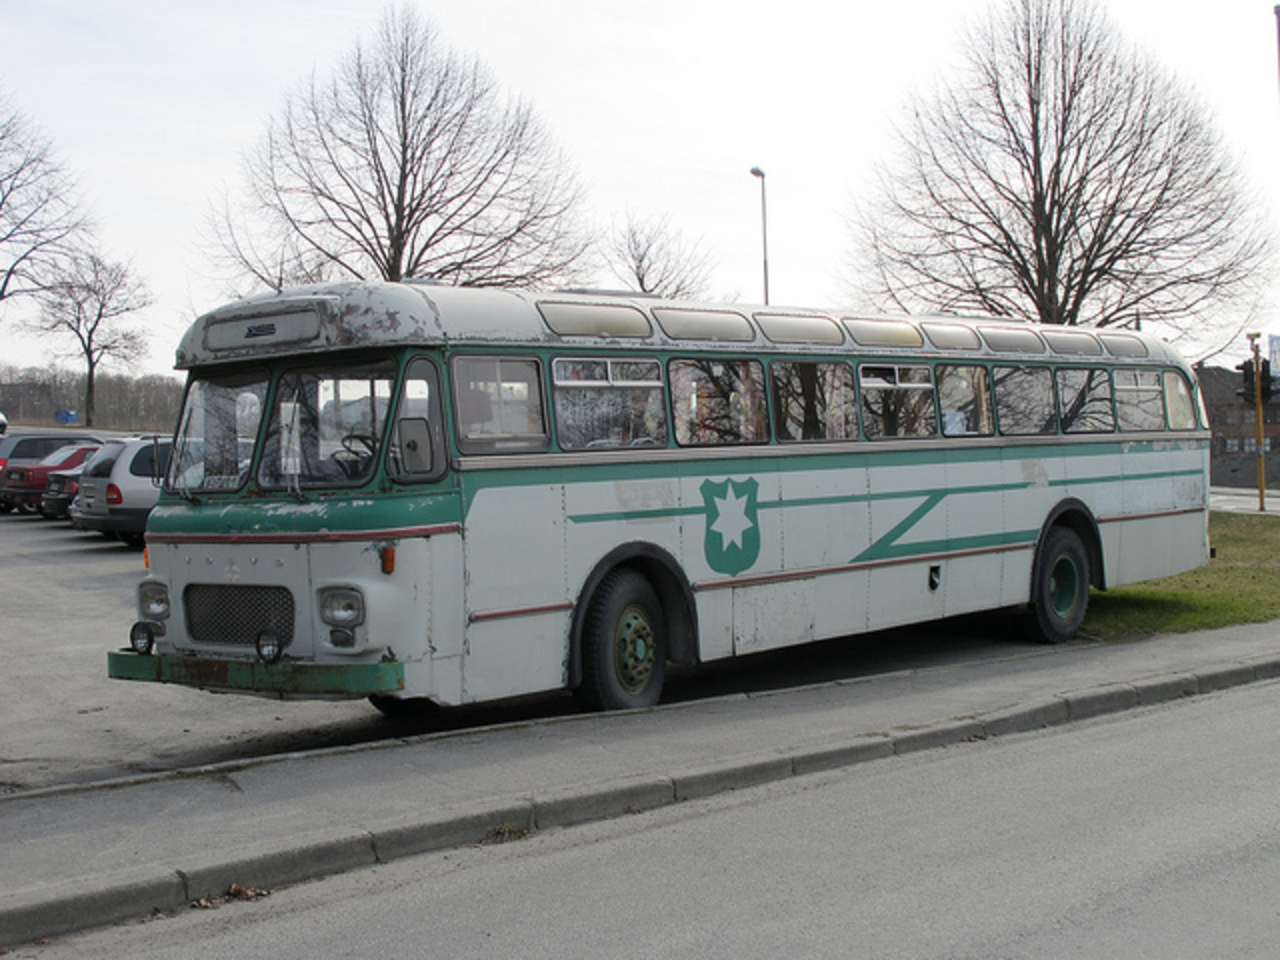 Flickr: The VOLVO TRUCKS and BUSES Pool